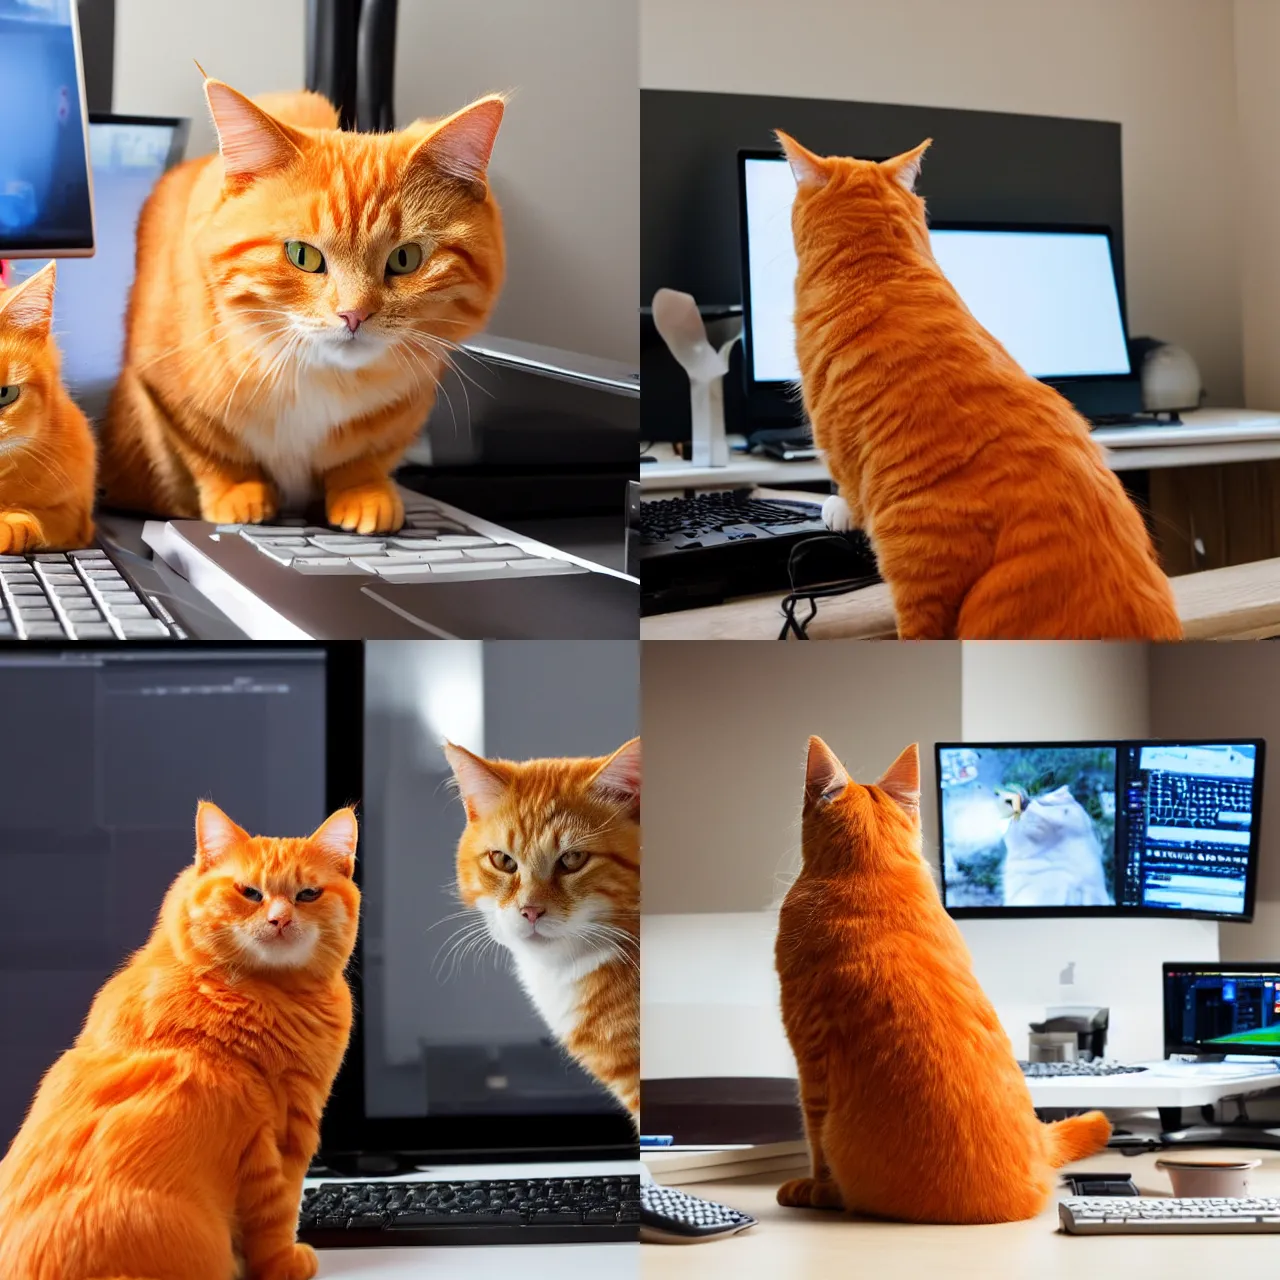 Prompt: a fluffy orange tabby cat is sitting next to a keyboard and mouse. the cat is blocking the view of a computer monitor.